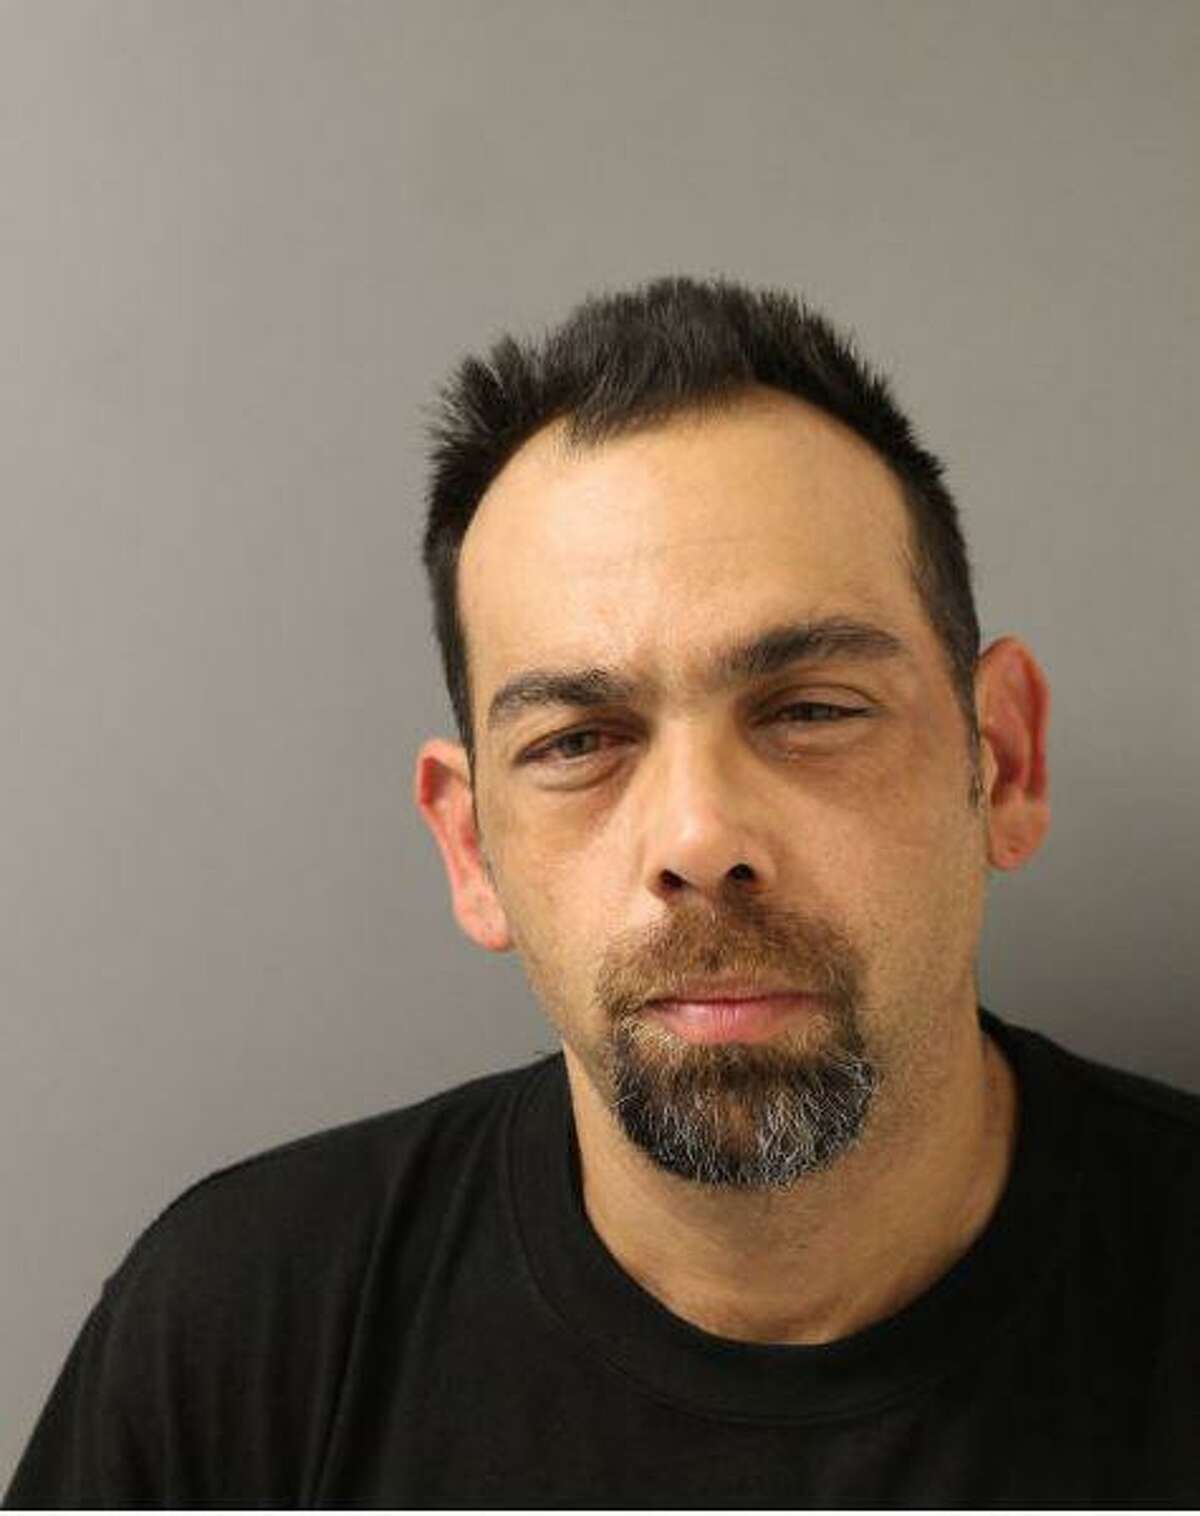 Paul Yonko, 34, was charged in December 2017 with aggravated robbery of a person 65 years of age or older.